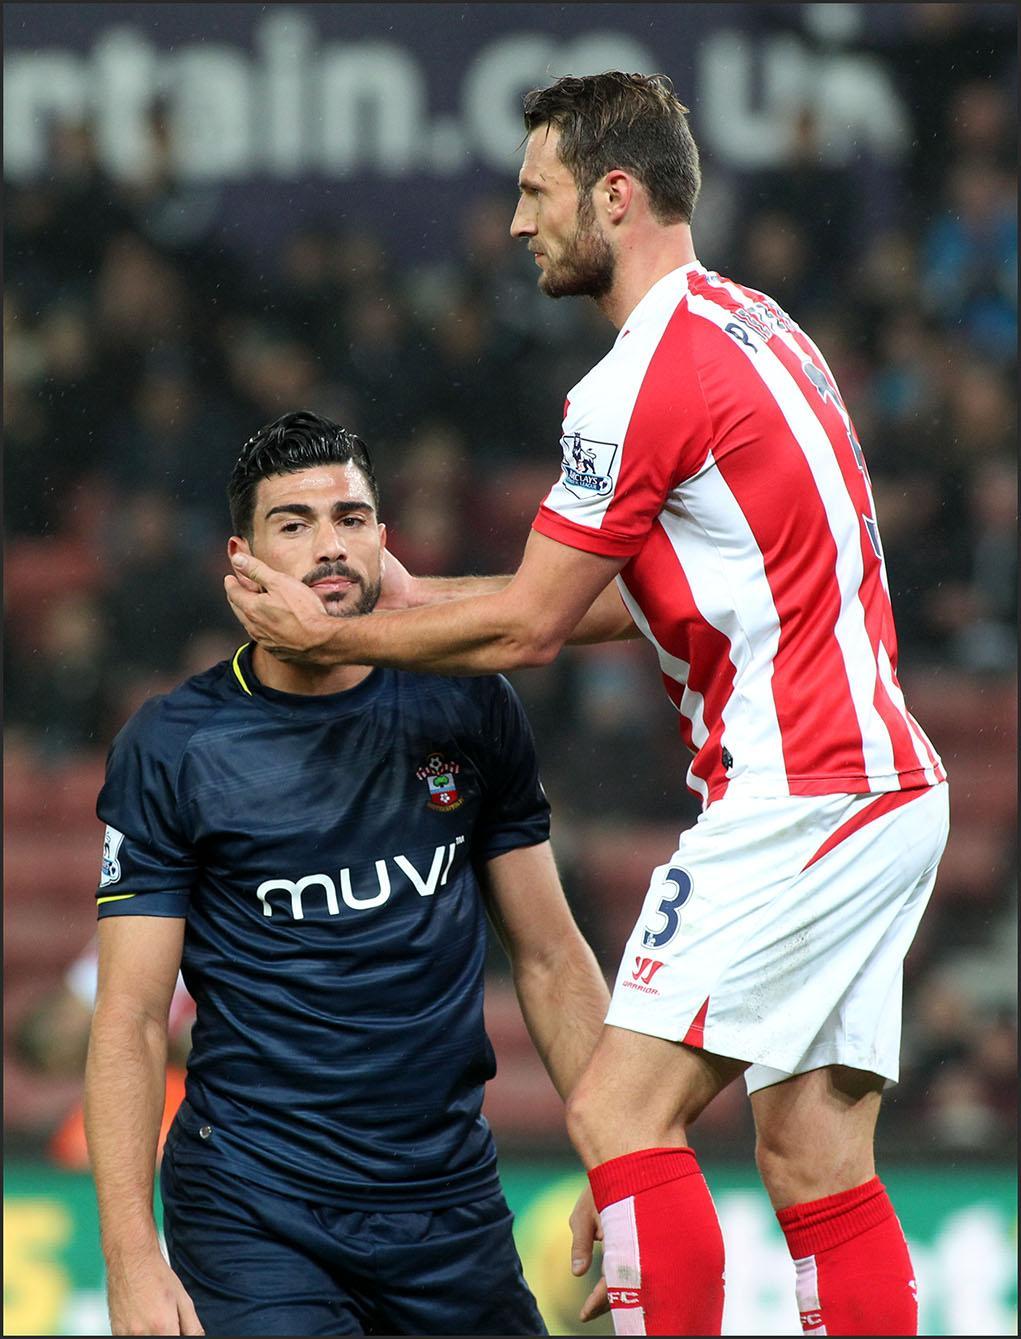 Stoke City v Saints at the Britannia Stadium in the Capital One Cup. The unauthorised downloading, editing, copying, or distribution of this image is strictly prohibited,